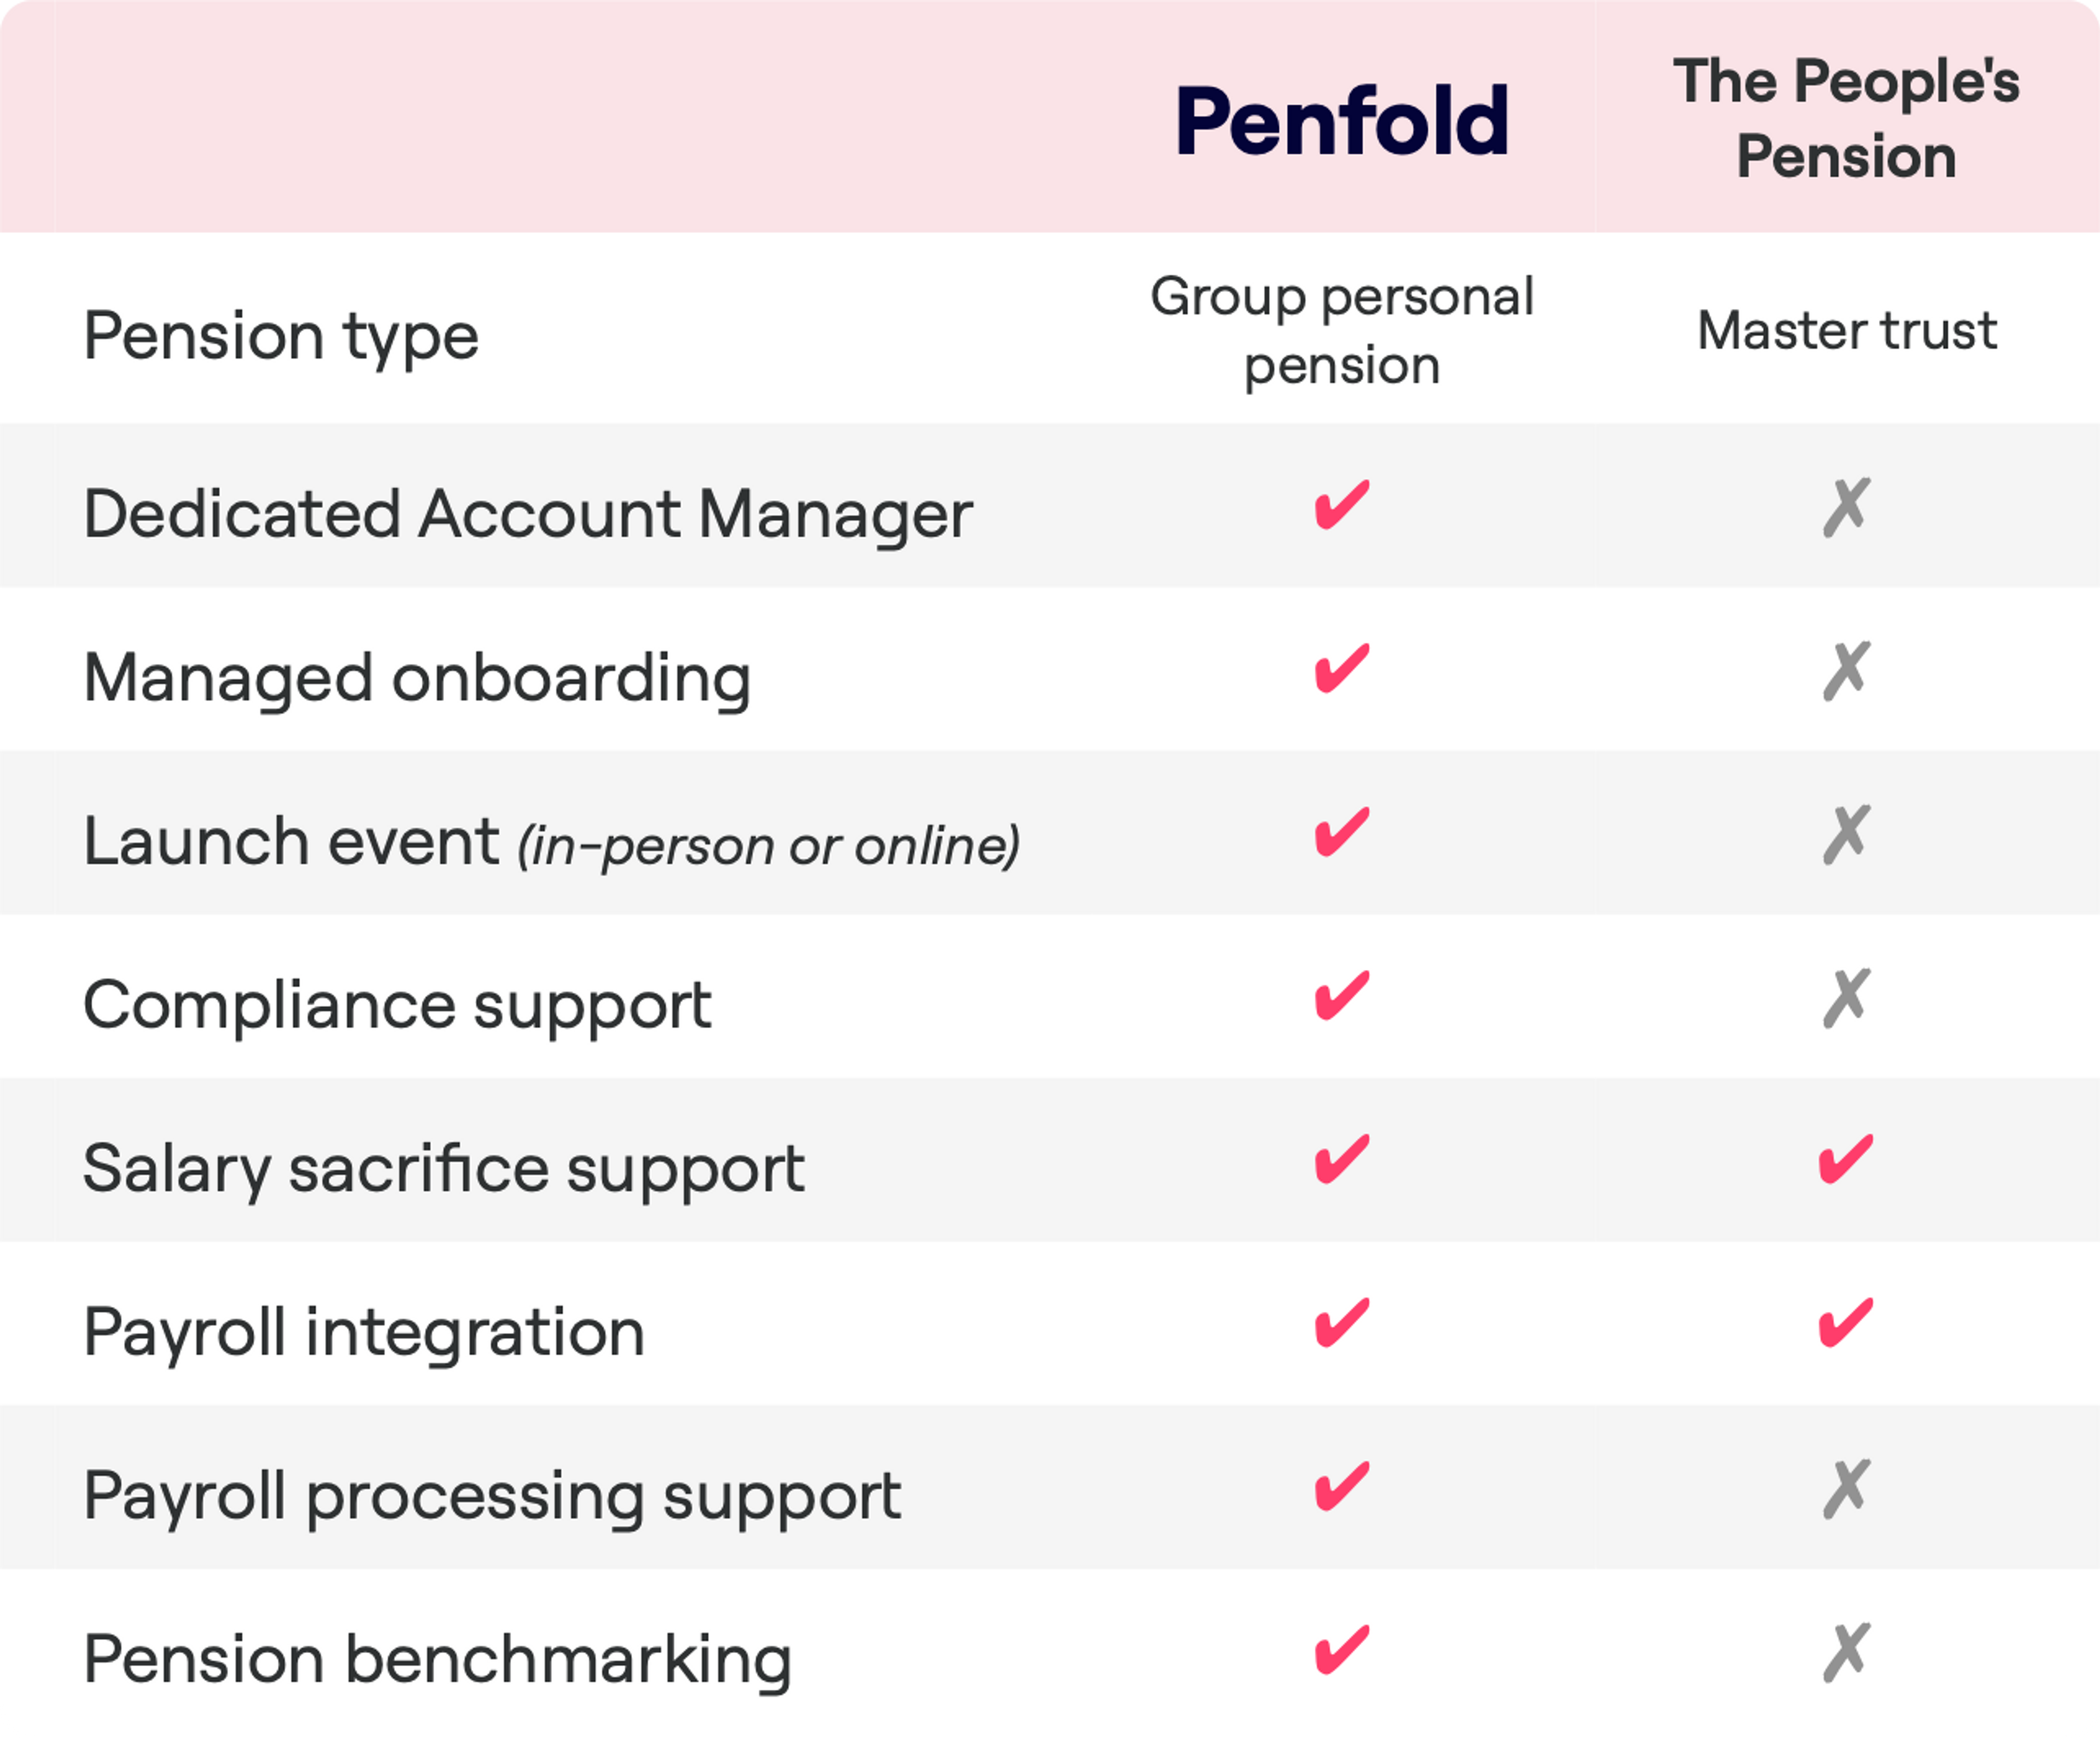 A comparison table between Penfold, classified as a Group personal pension, and The People's Pension, a Master trust. Features compared include Dedicated Account Manager, Managed onboarding, Launch event, Compliance support, Salary sacrifice support, Payroll integration, Payroll processing support, and Pension benchmarking. Penfold offers all eight features. The People's Pension offers Salary sacrifice support and Payroll integration but does not provide the other listed features.